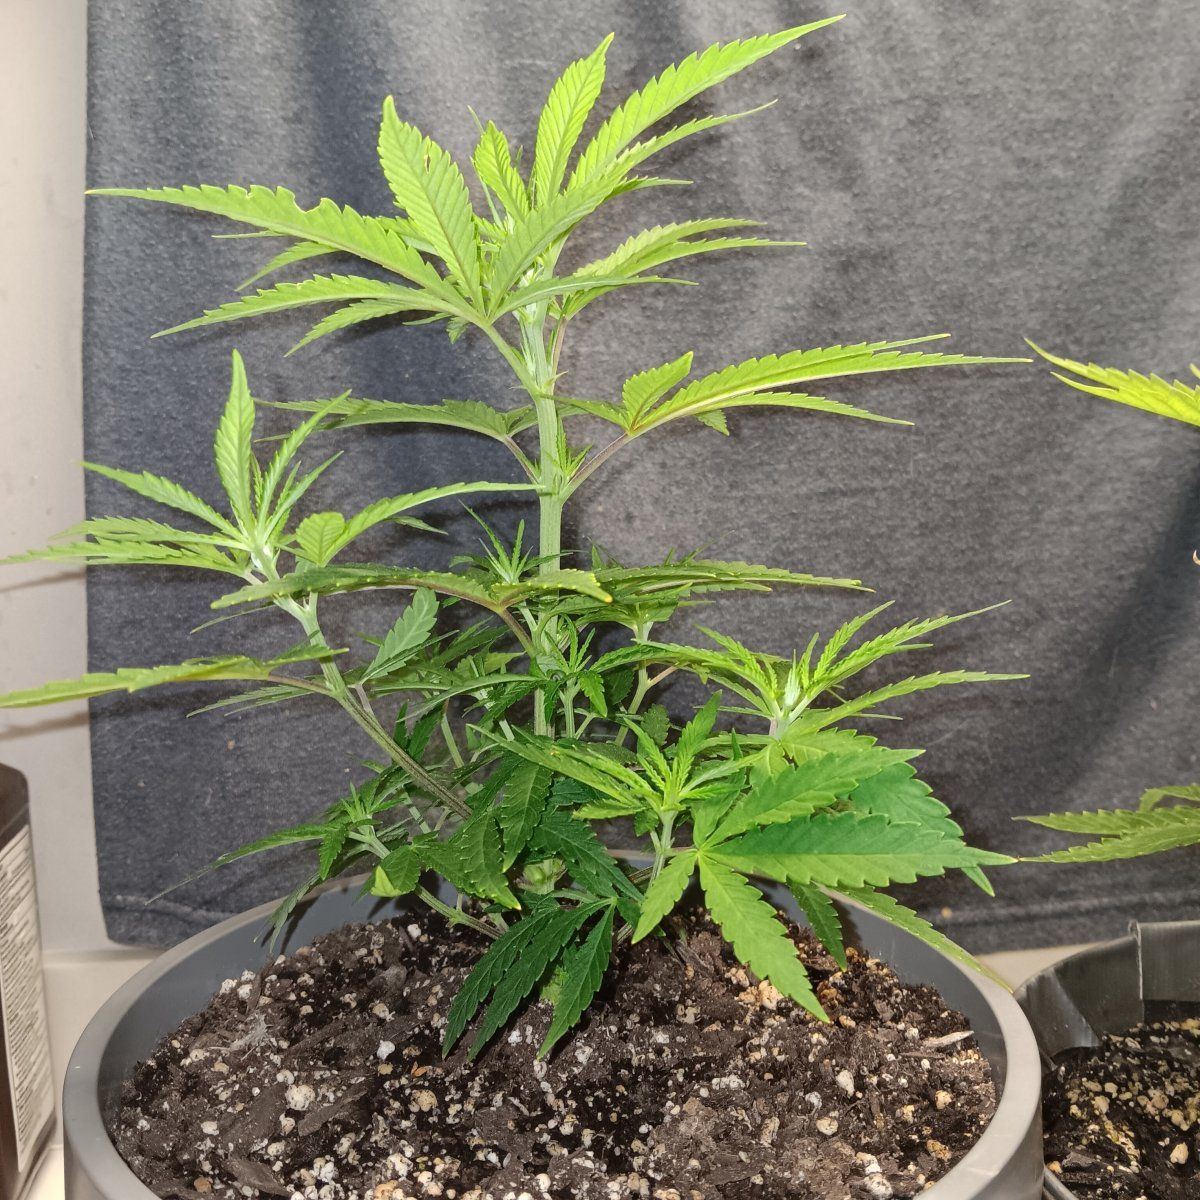 Any help would be appreciated new grower here having a color issue with one plant being too li 5